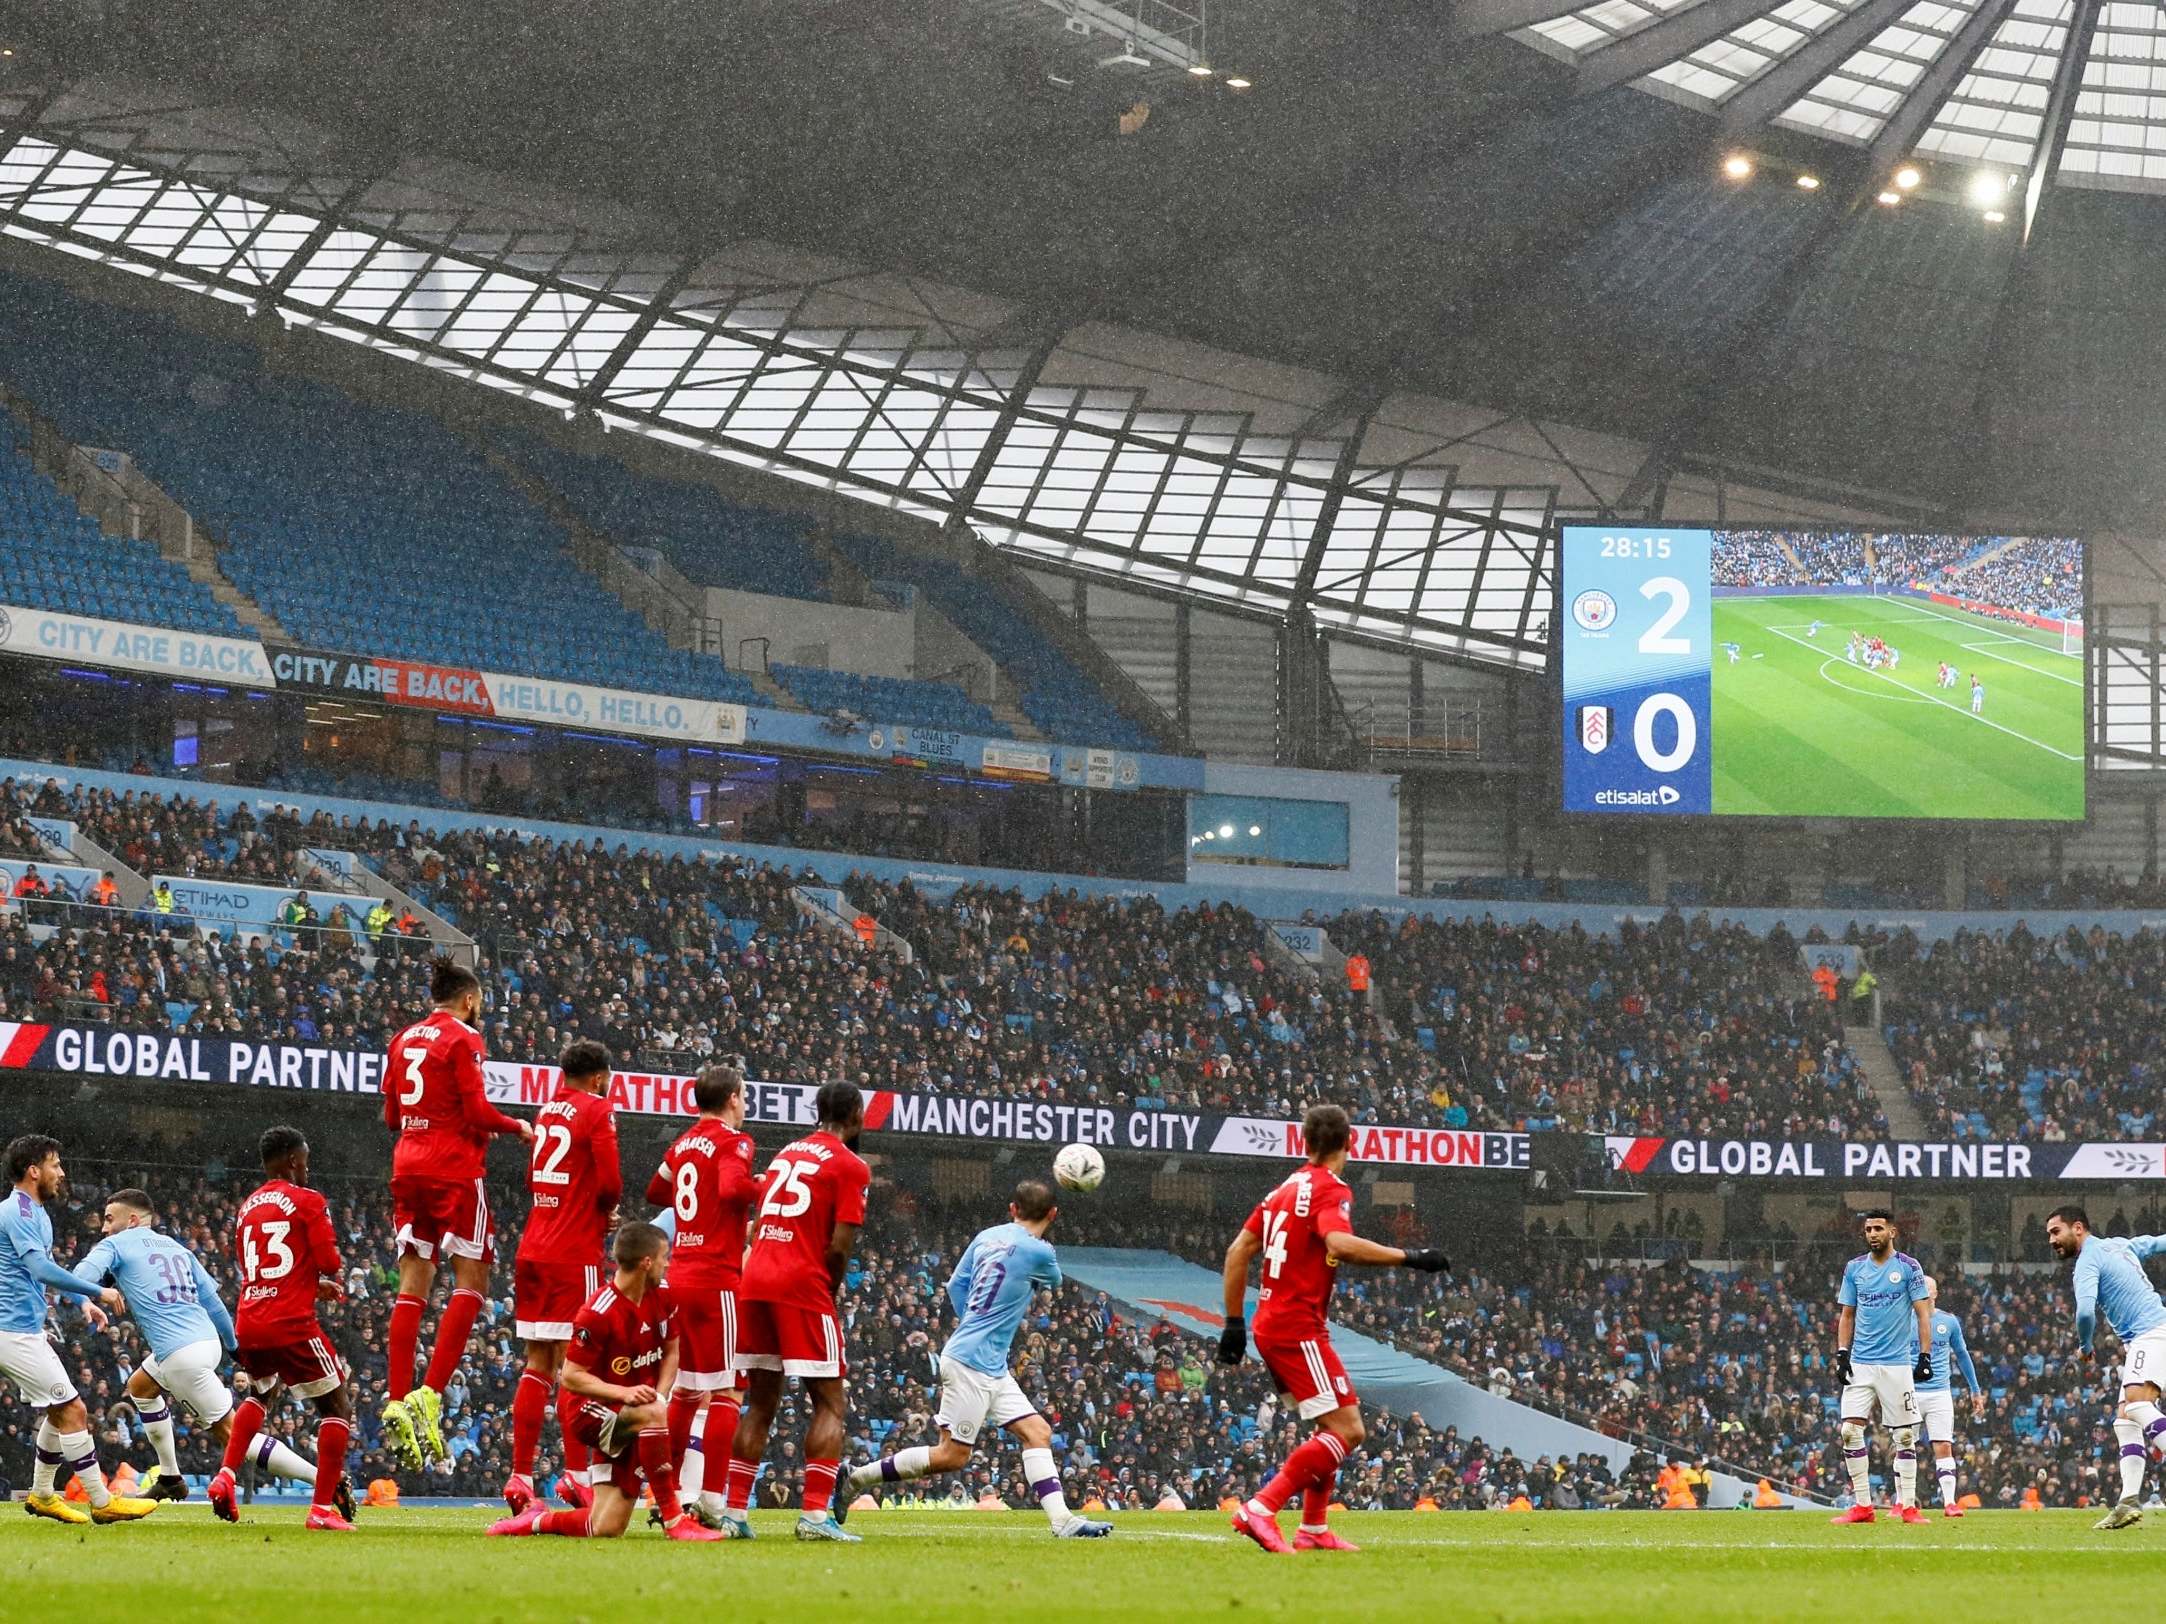 Manchester City beat Fulham in front of many empty seats at the Etihad